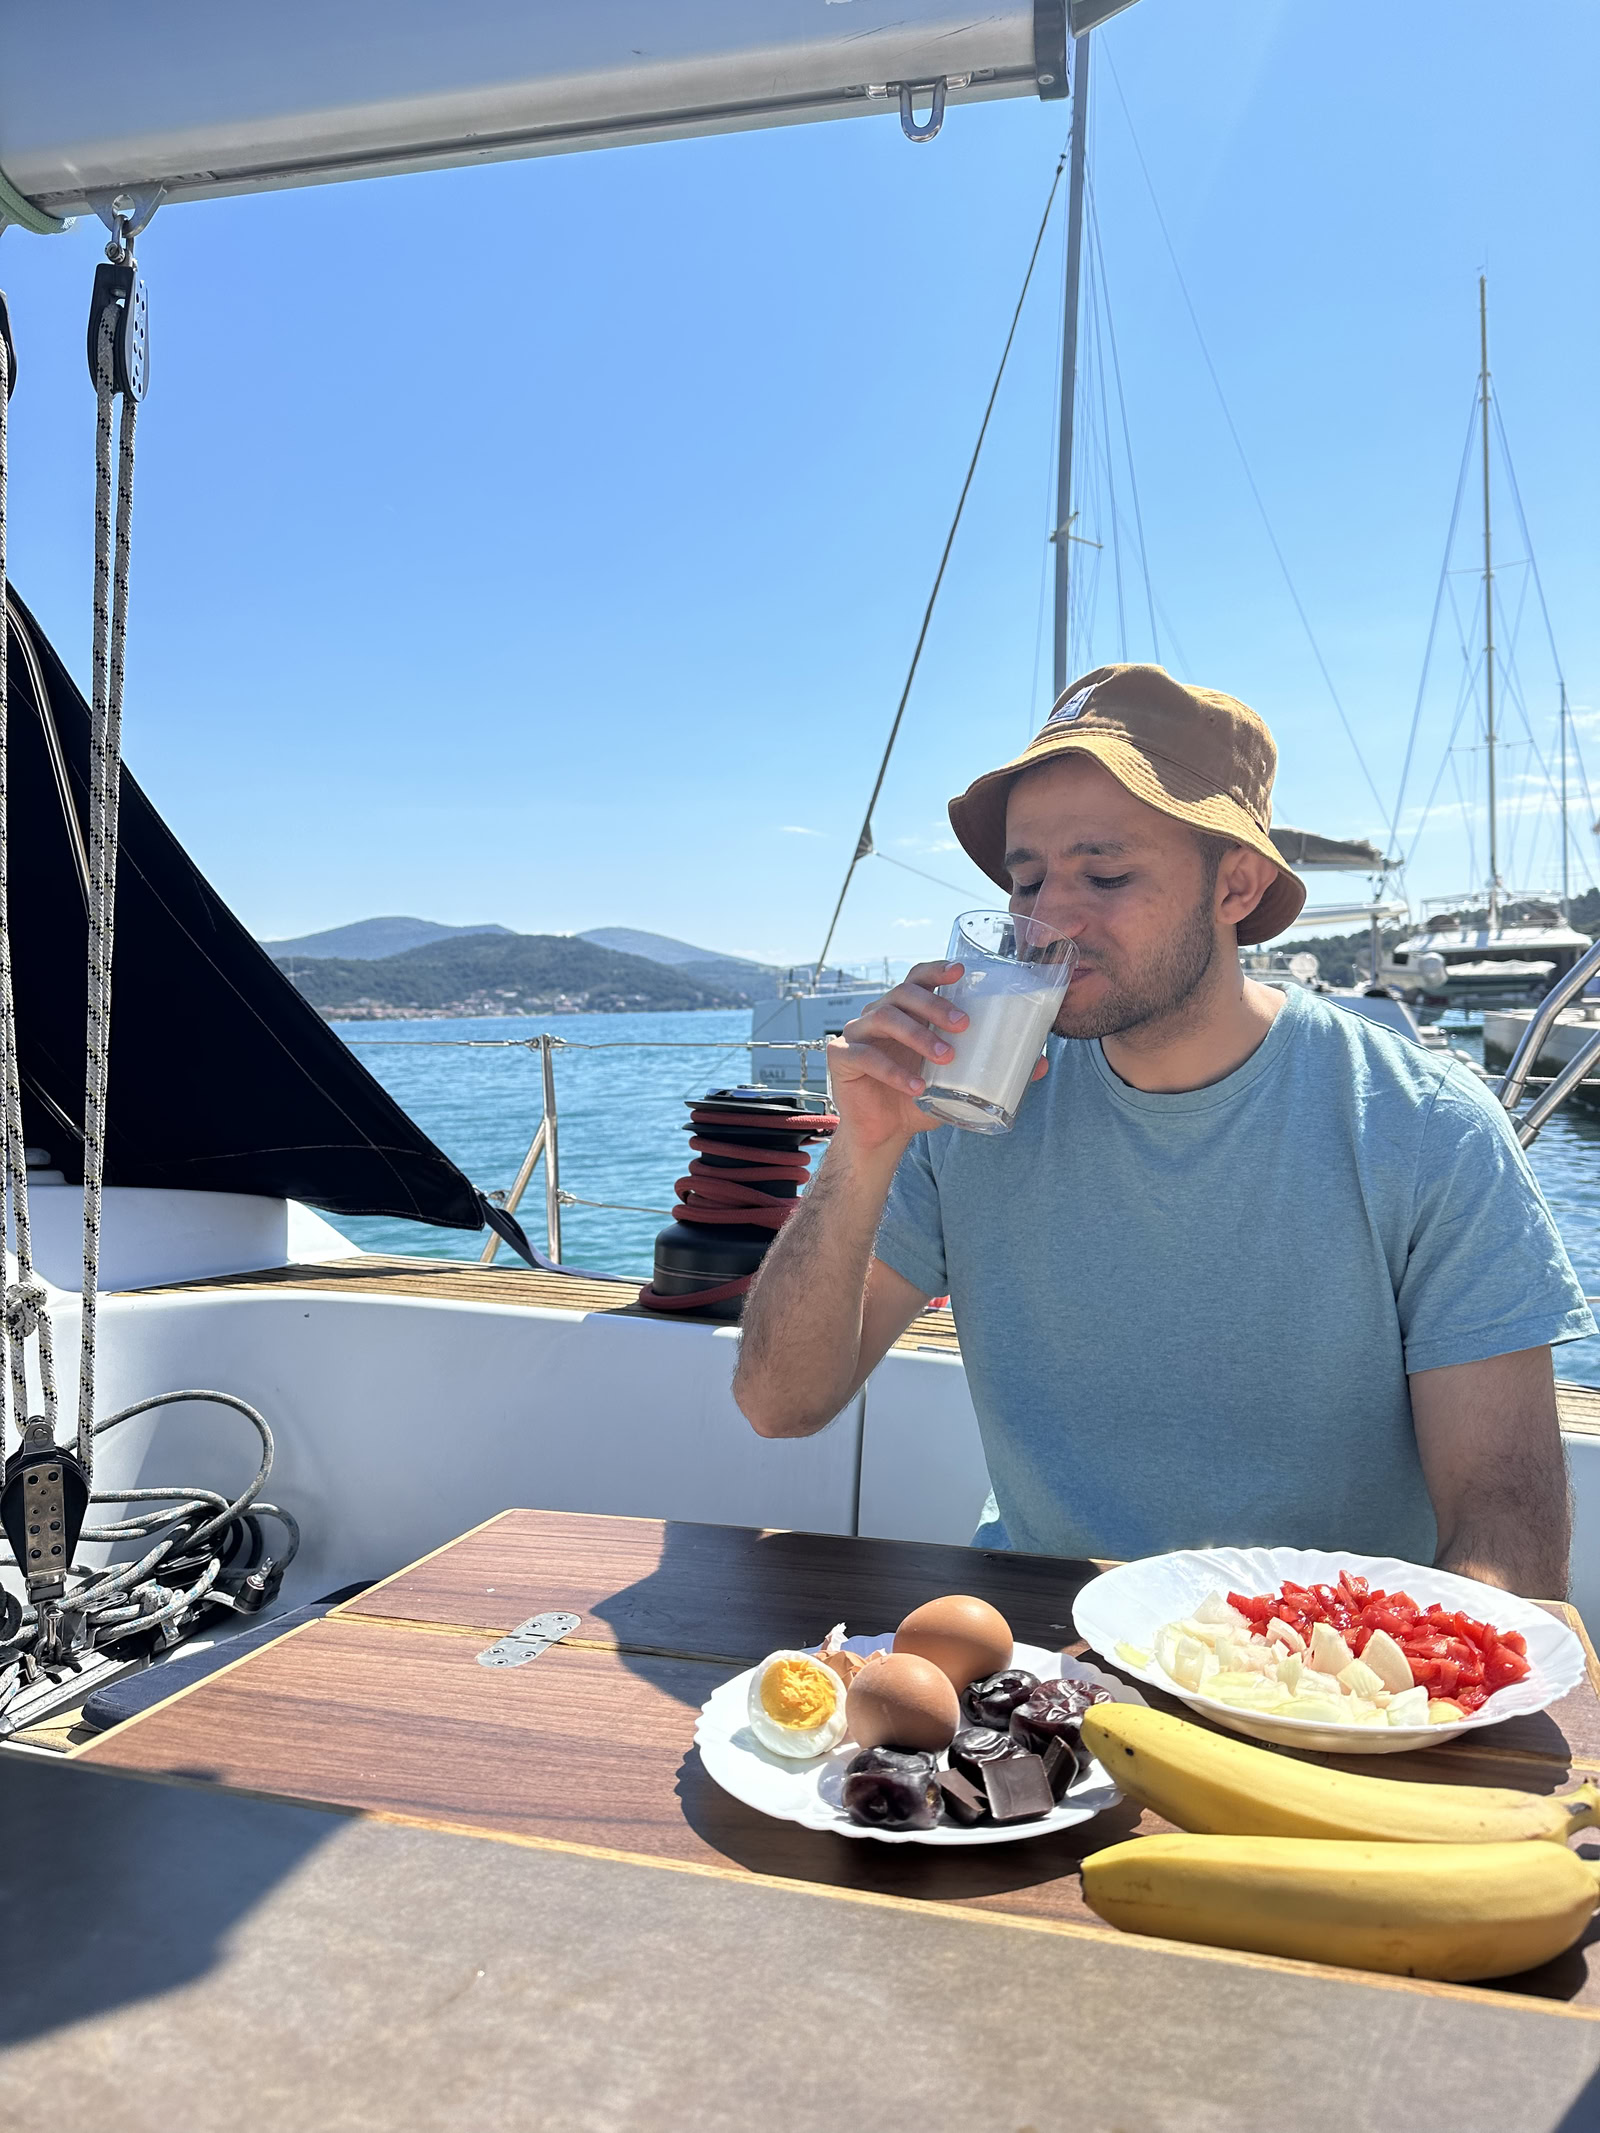 Me eating my first breakfast at the boat -- looks like someone who despise the milk, but it is not